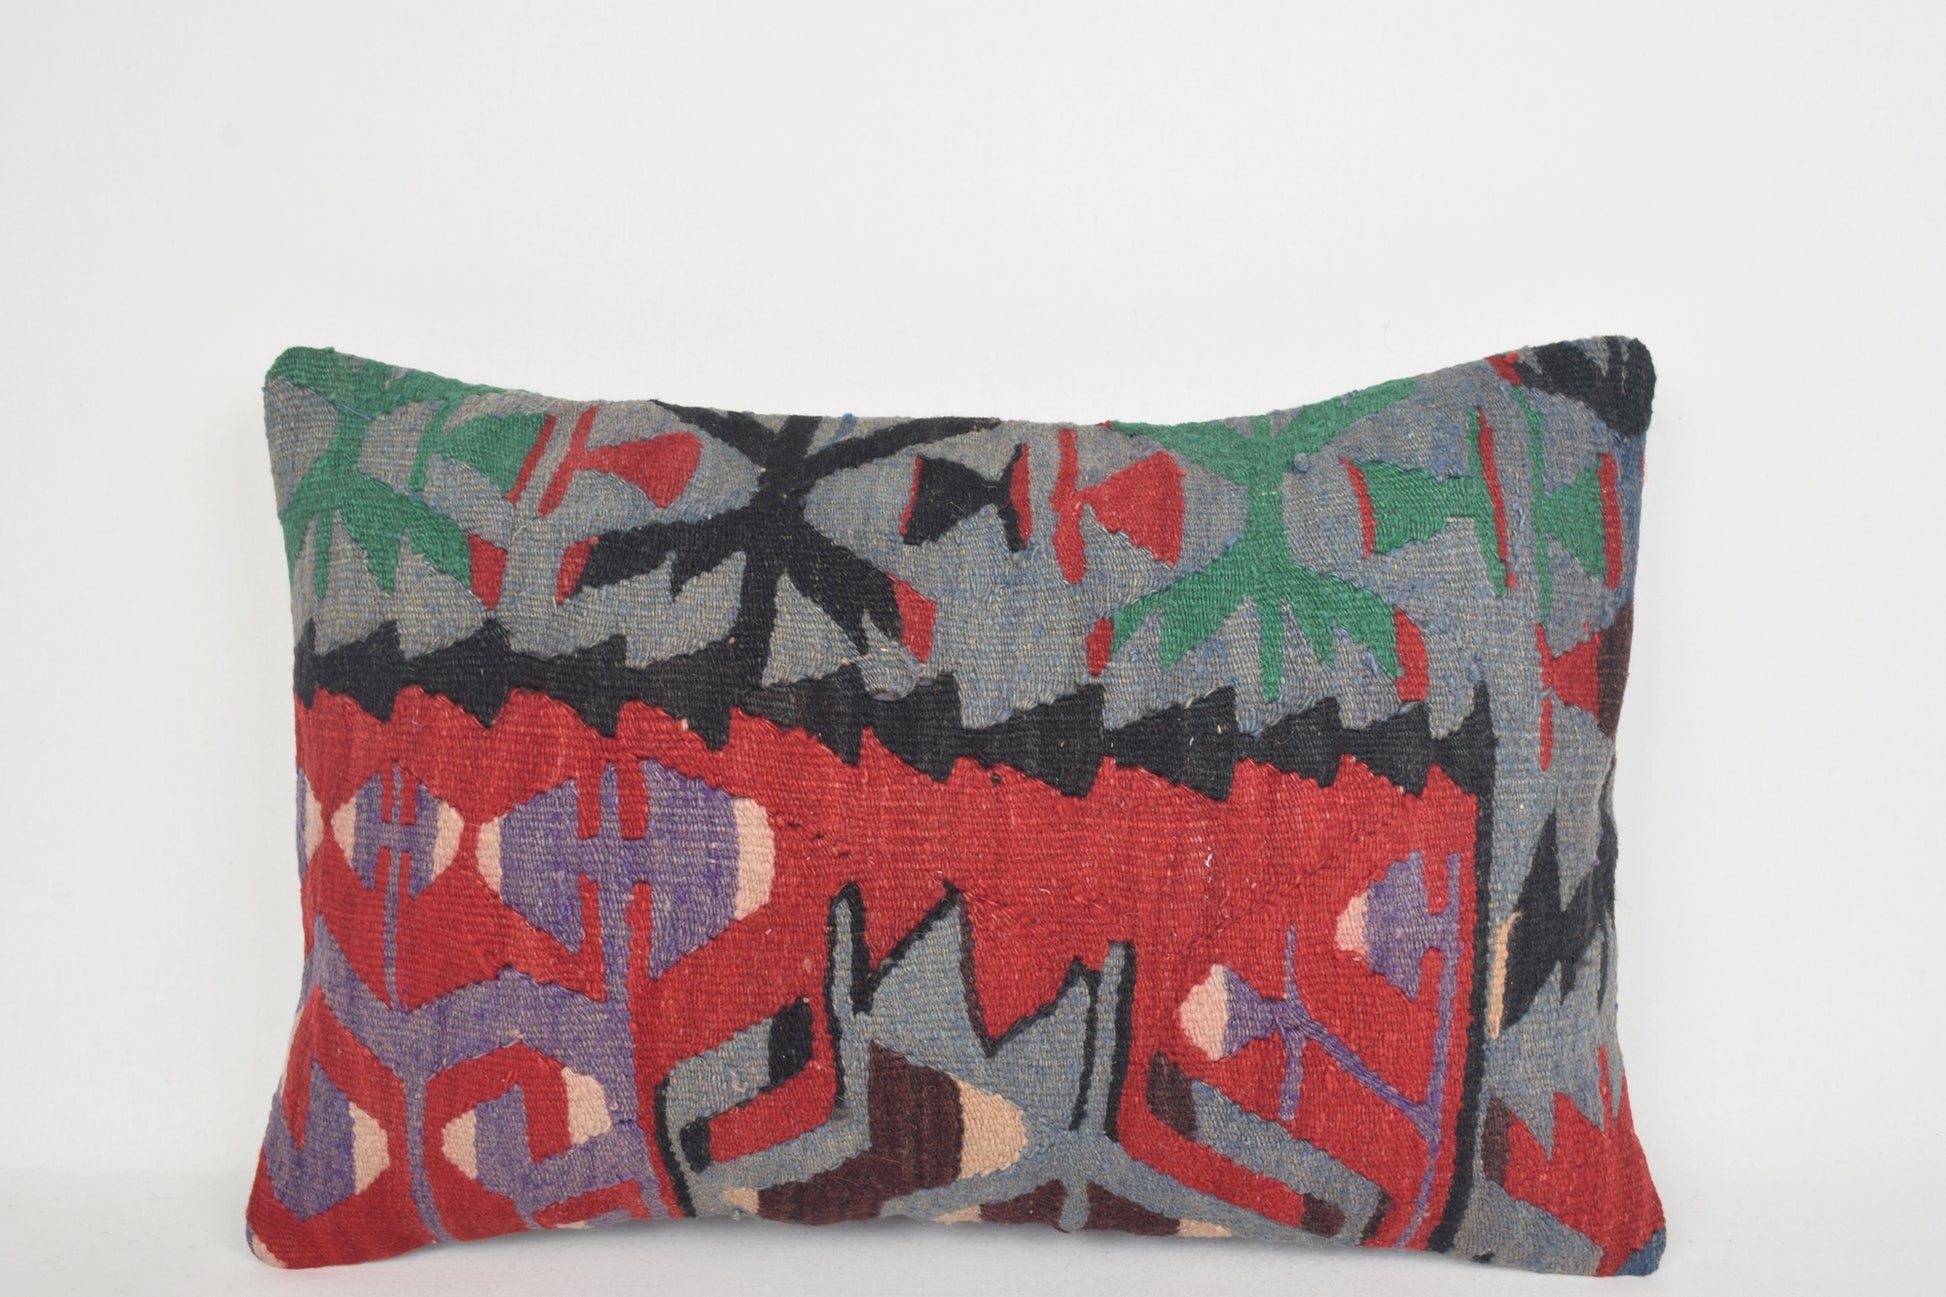 Kilim Pillow Urban Outfitters E00130 Lumbar Middle East Knotted